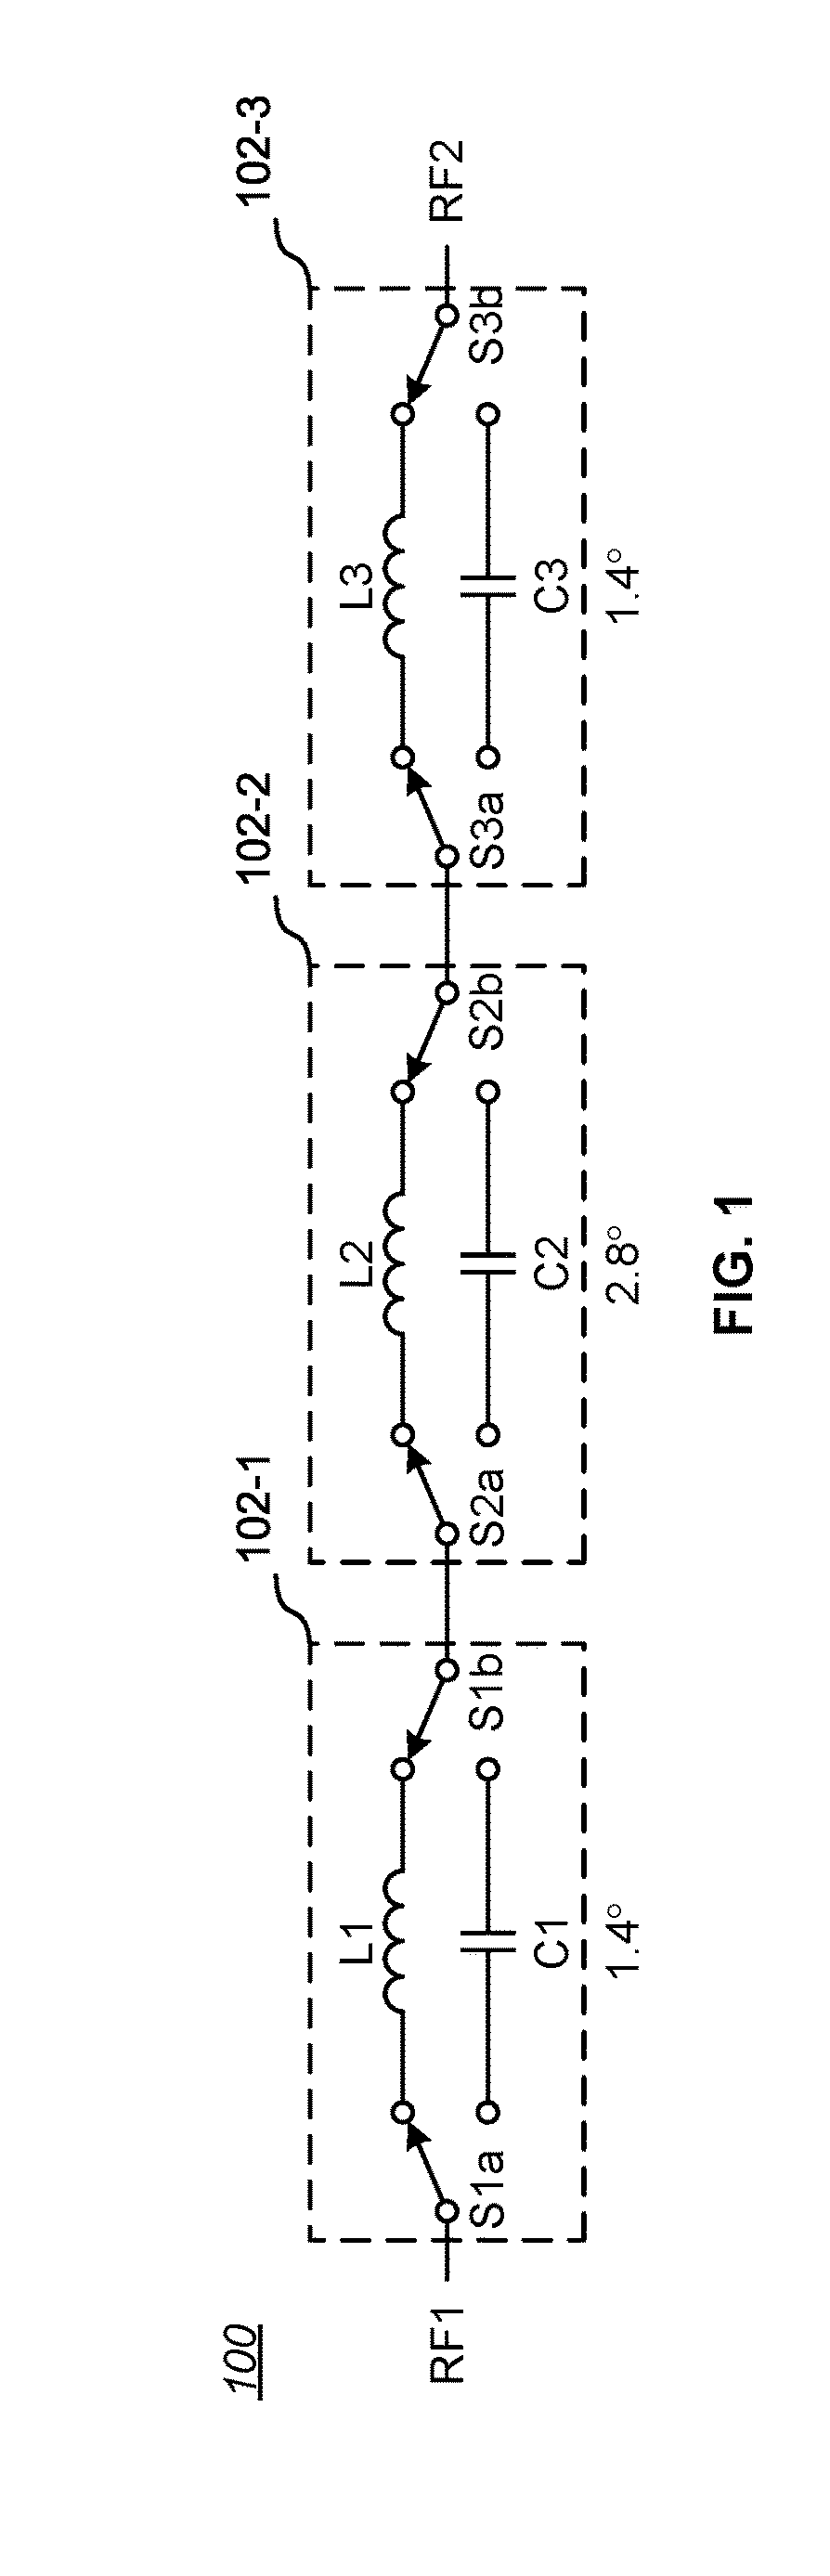 Low Loss Multi-State Phase Shifter